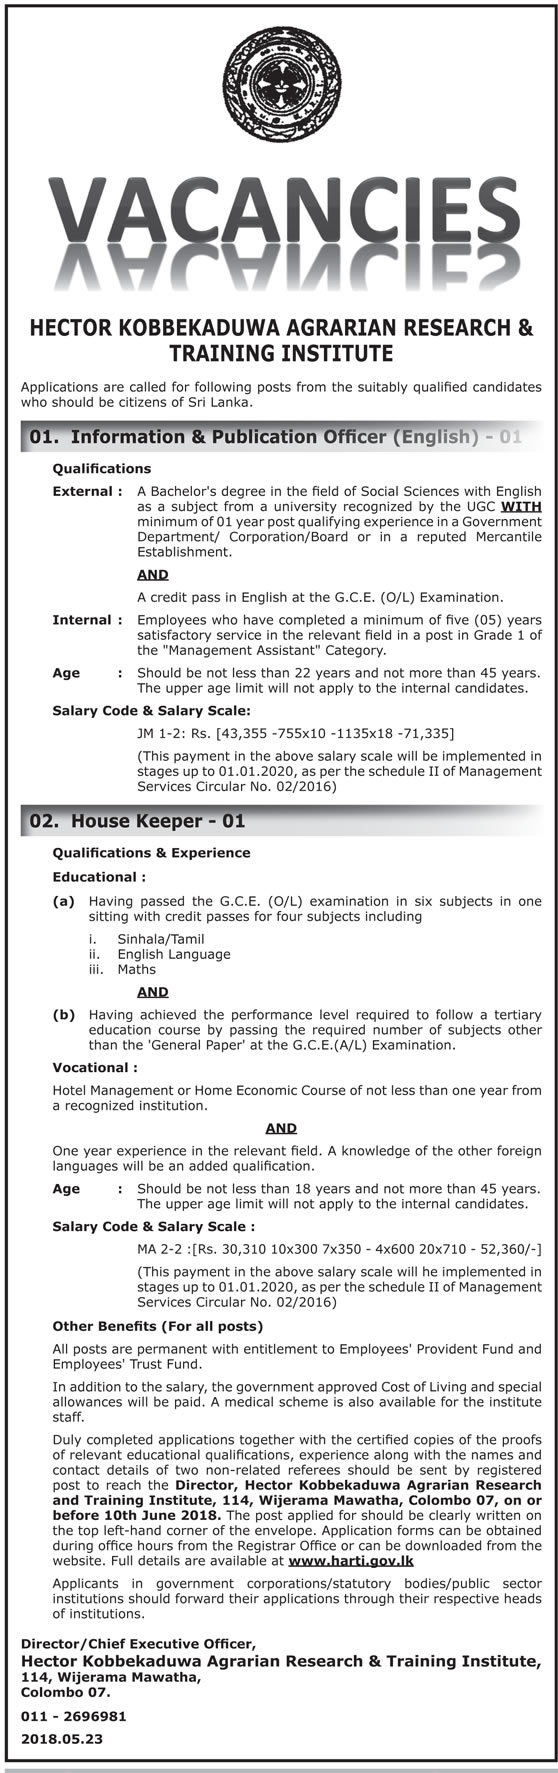 Information & Publication Officer (English), House Keeper – Hector Kobbekaduwa Agrarian Research & Training Institute Jobs Vacancies